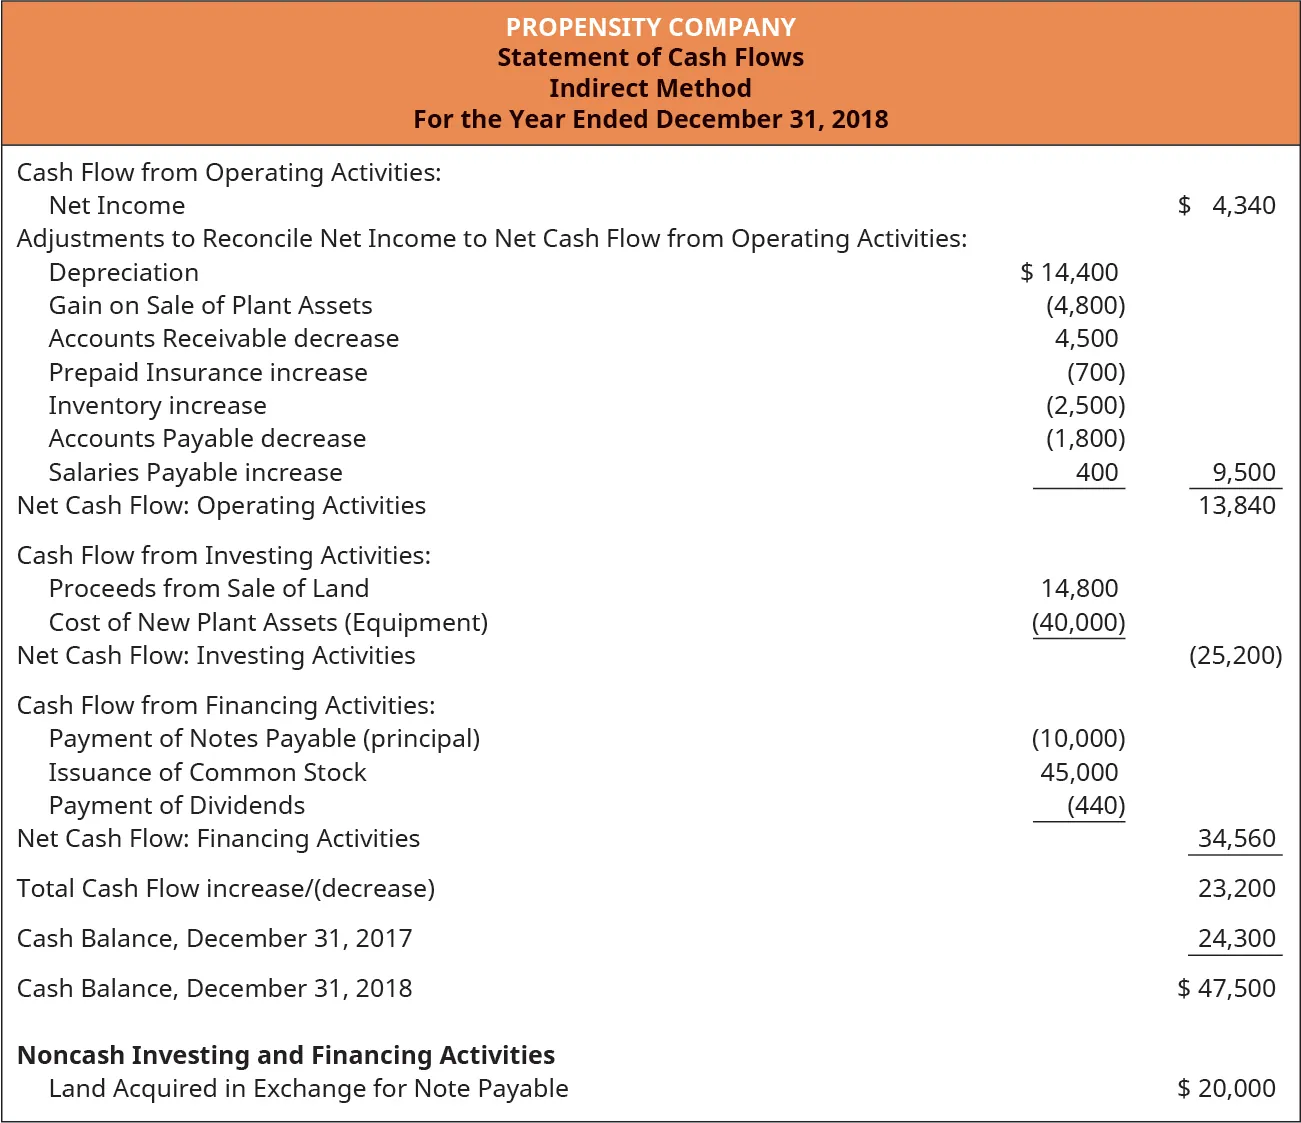 Propensity Company. Statement of Cash Flows. Indirect Method. Year Ended December 31, 2018. Cash Flow from Operating Activities: Net Income $4,340. Adjustments to Reconcile Net Income to Net Cash Flow from Operating Activities: Depreciation $14,400. Gain on Sale of Plant Assets (4,800). Accounts Receivable decrease 4,500. Prepaid Insurance increase (700). Inventory increase (2,500). Accounts Payable decrease (1,800). Salaries Payable increase 400. Total Adjustments 9,500. Net Cash Flow: Operating Activities $13,840. Cash Flow from Investing Activities: Proceeds from Sale of Land $14,800. Cost of New Plant Assets (Equipment) (40,000). Net Cash Flow: Investing Activities ($25,200). Cash Flow from Financing Activities: Payment of Notes Payable (principal) (10,000). Issuance of Common Stock 45,000. Payment of Dividends (440). Net Cash Flow: Financing Activities $34,560. Total Cash Flow increase 23,200. Cash Balance December 31, 2017 24,300. Cash Balance December 31, 2018 47,500. Non-cash Investing and Financing Activities. Land Acquired in Exchange for Note Payable $20,000.